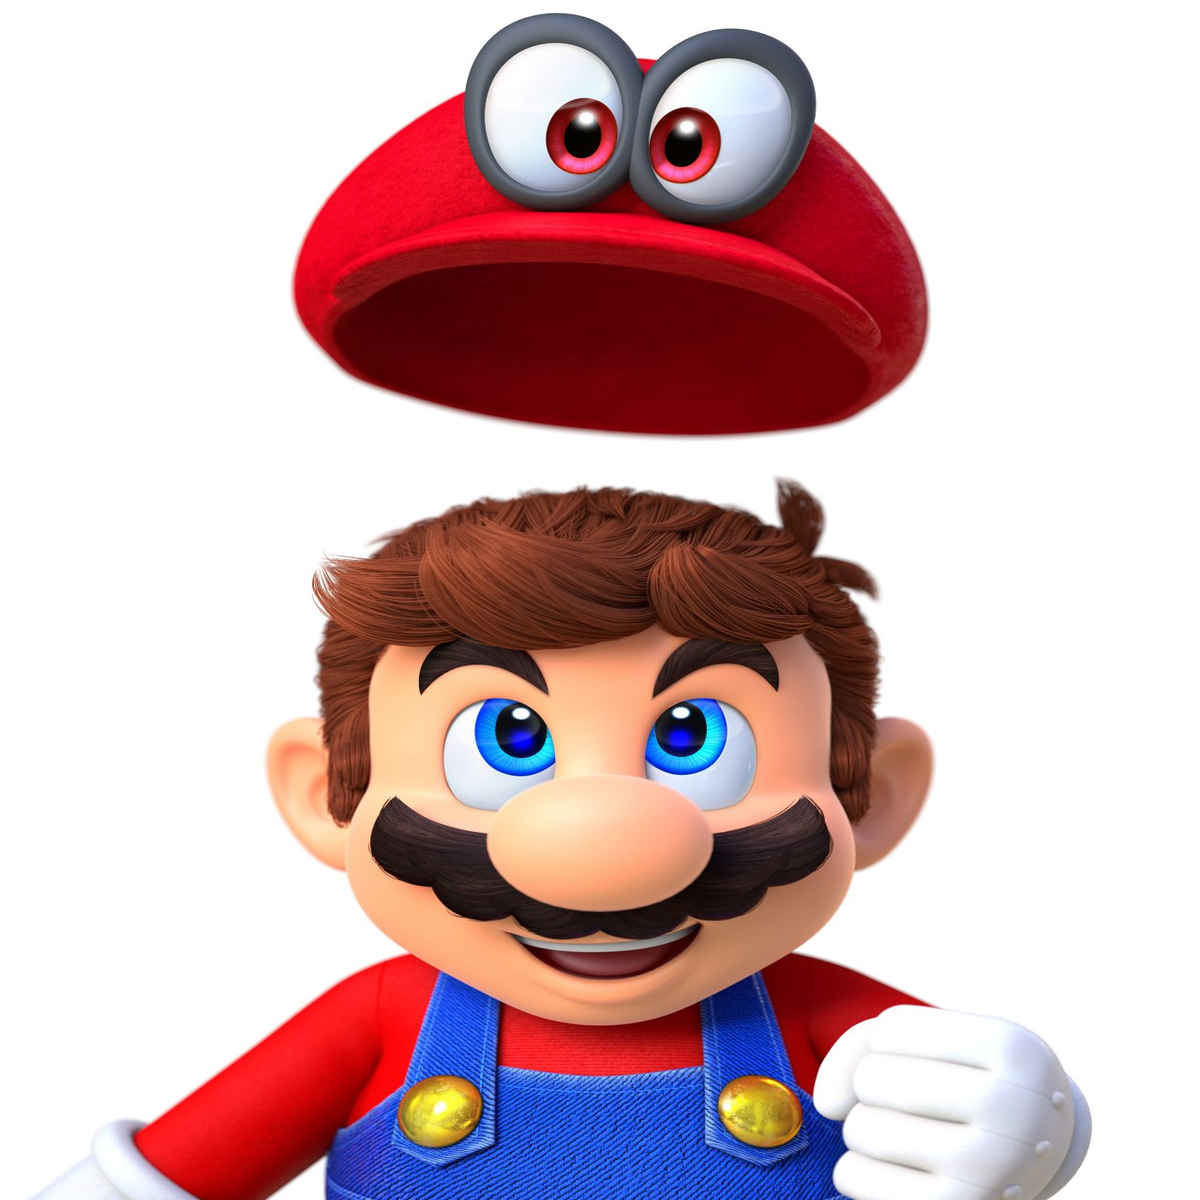 Super Mario Odyssey' Is Now The Fastest-Selling Mario Game Ever In The US